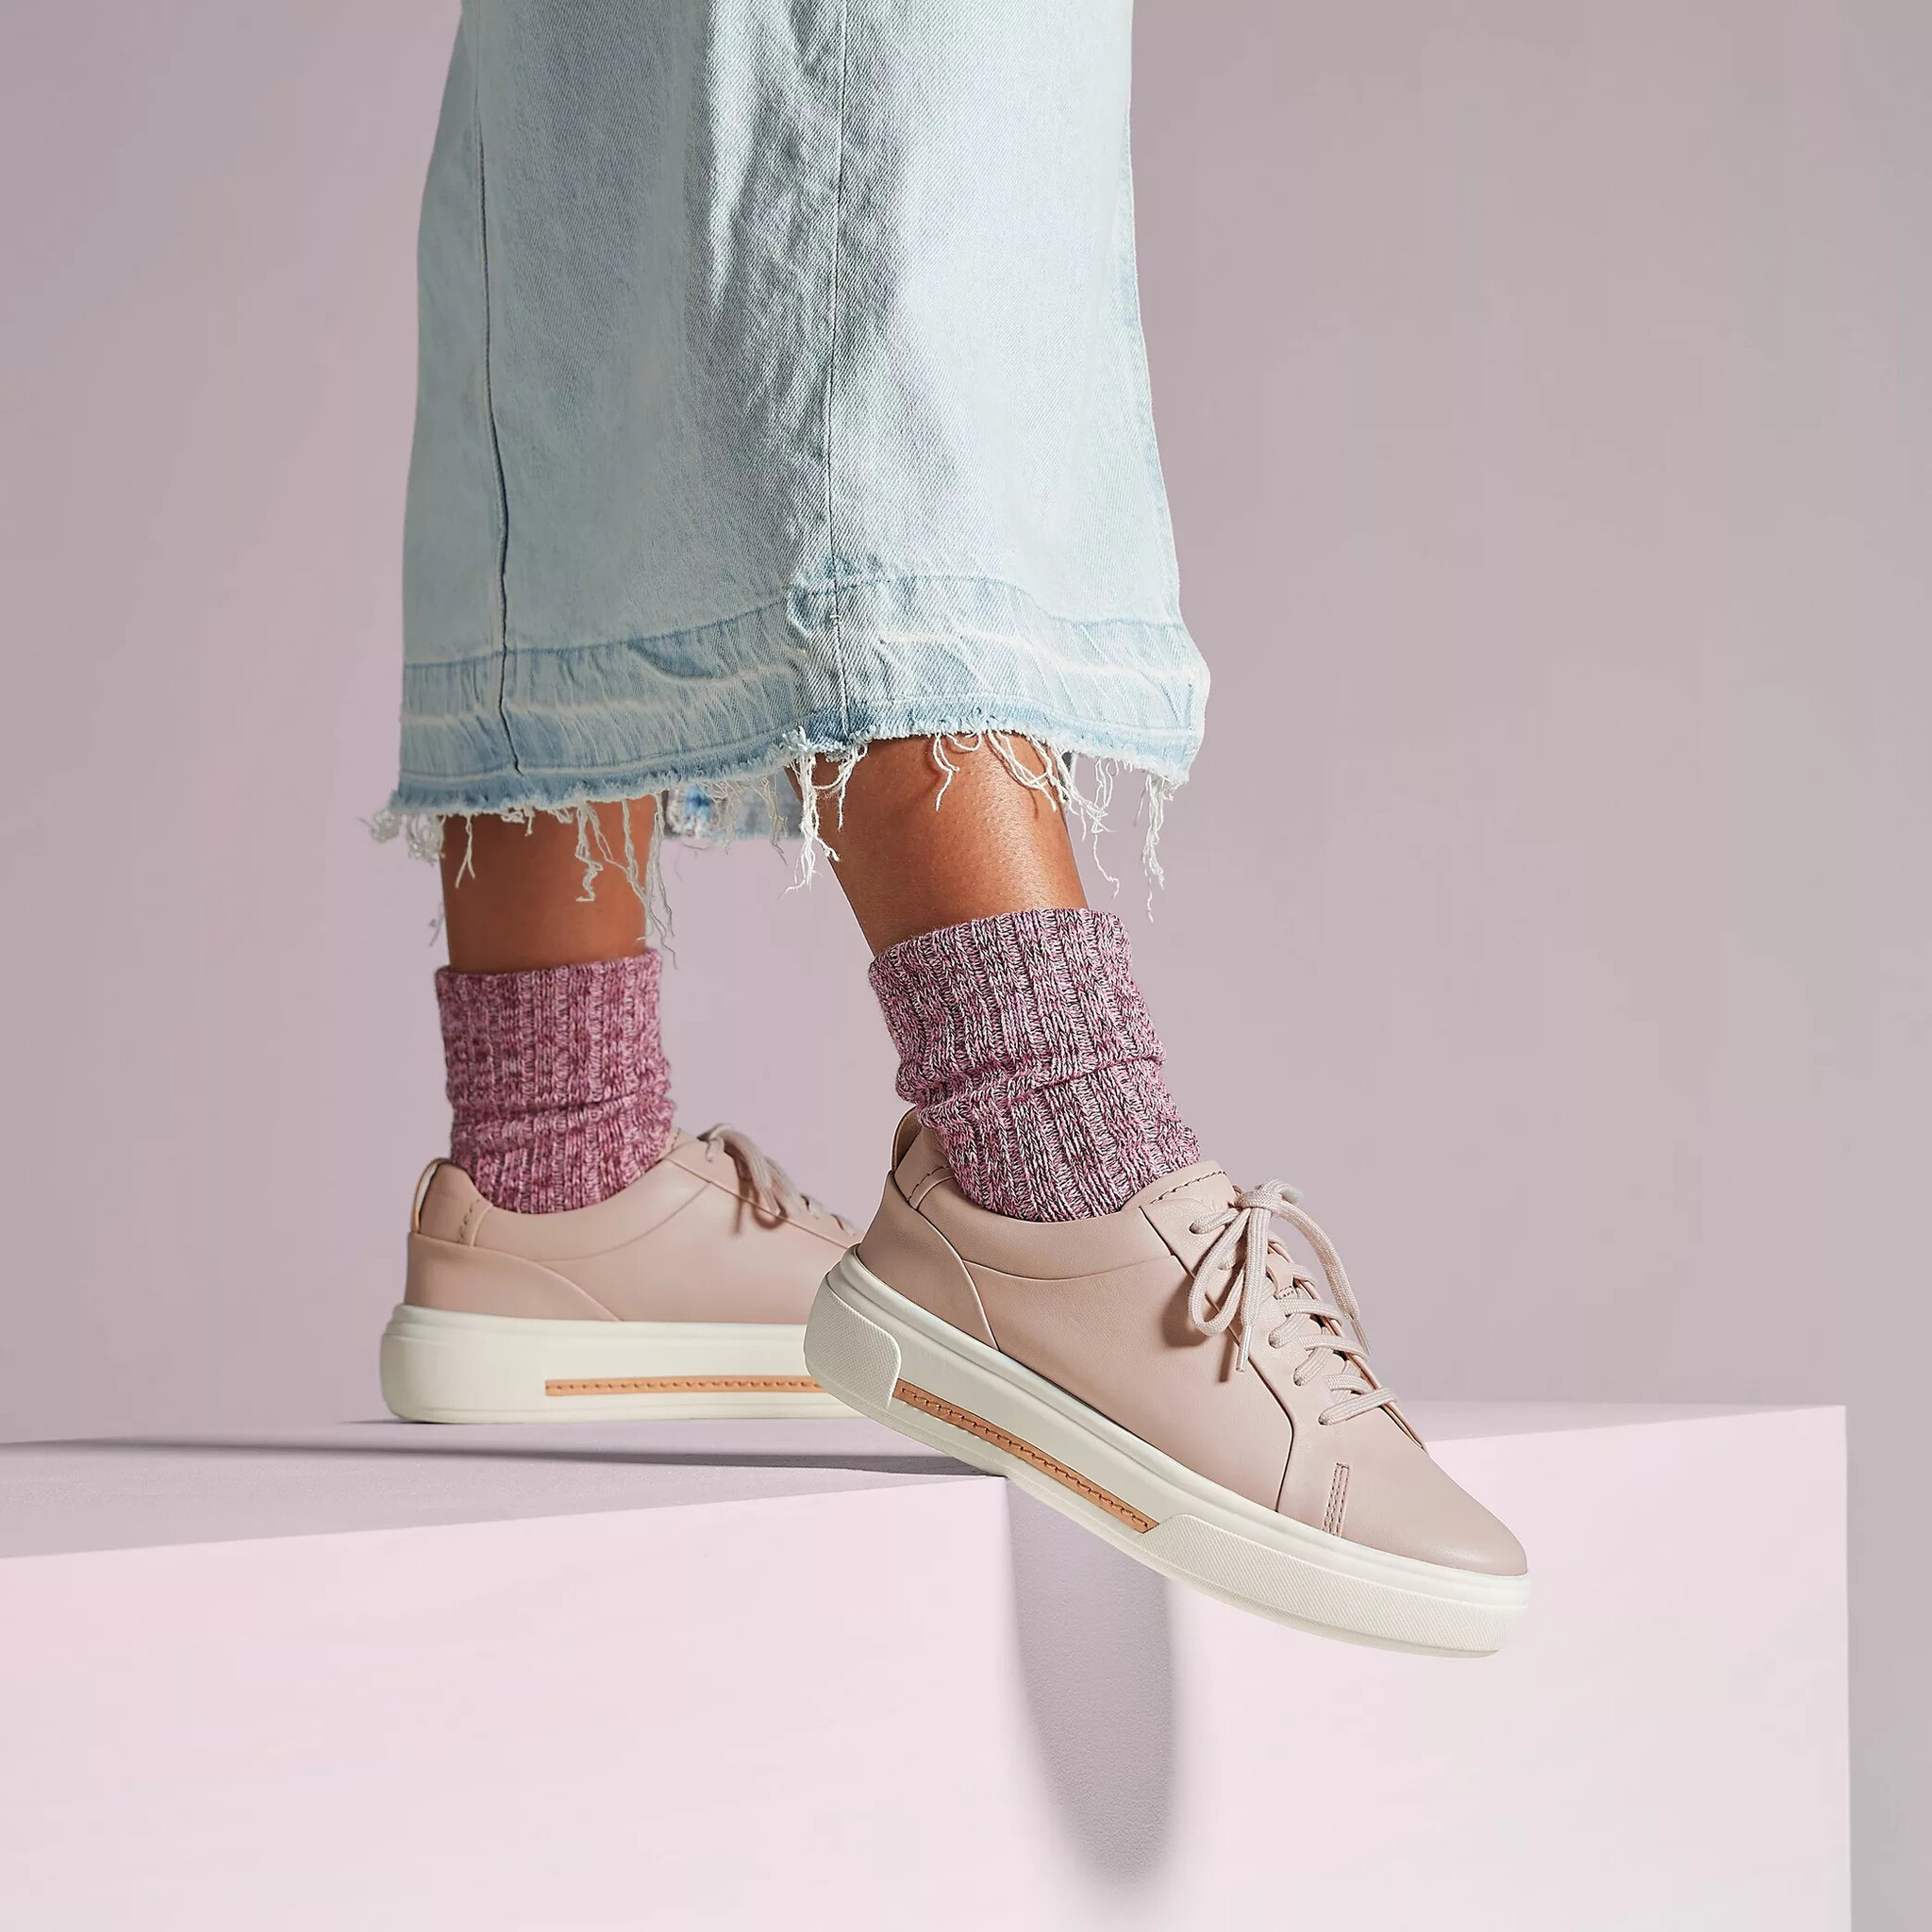 A model shows off Hollyhock Walk sneakers from Clarks in rose leather.